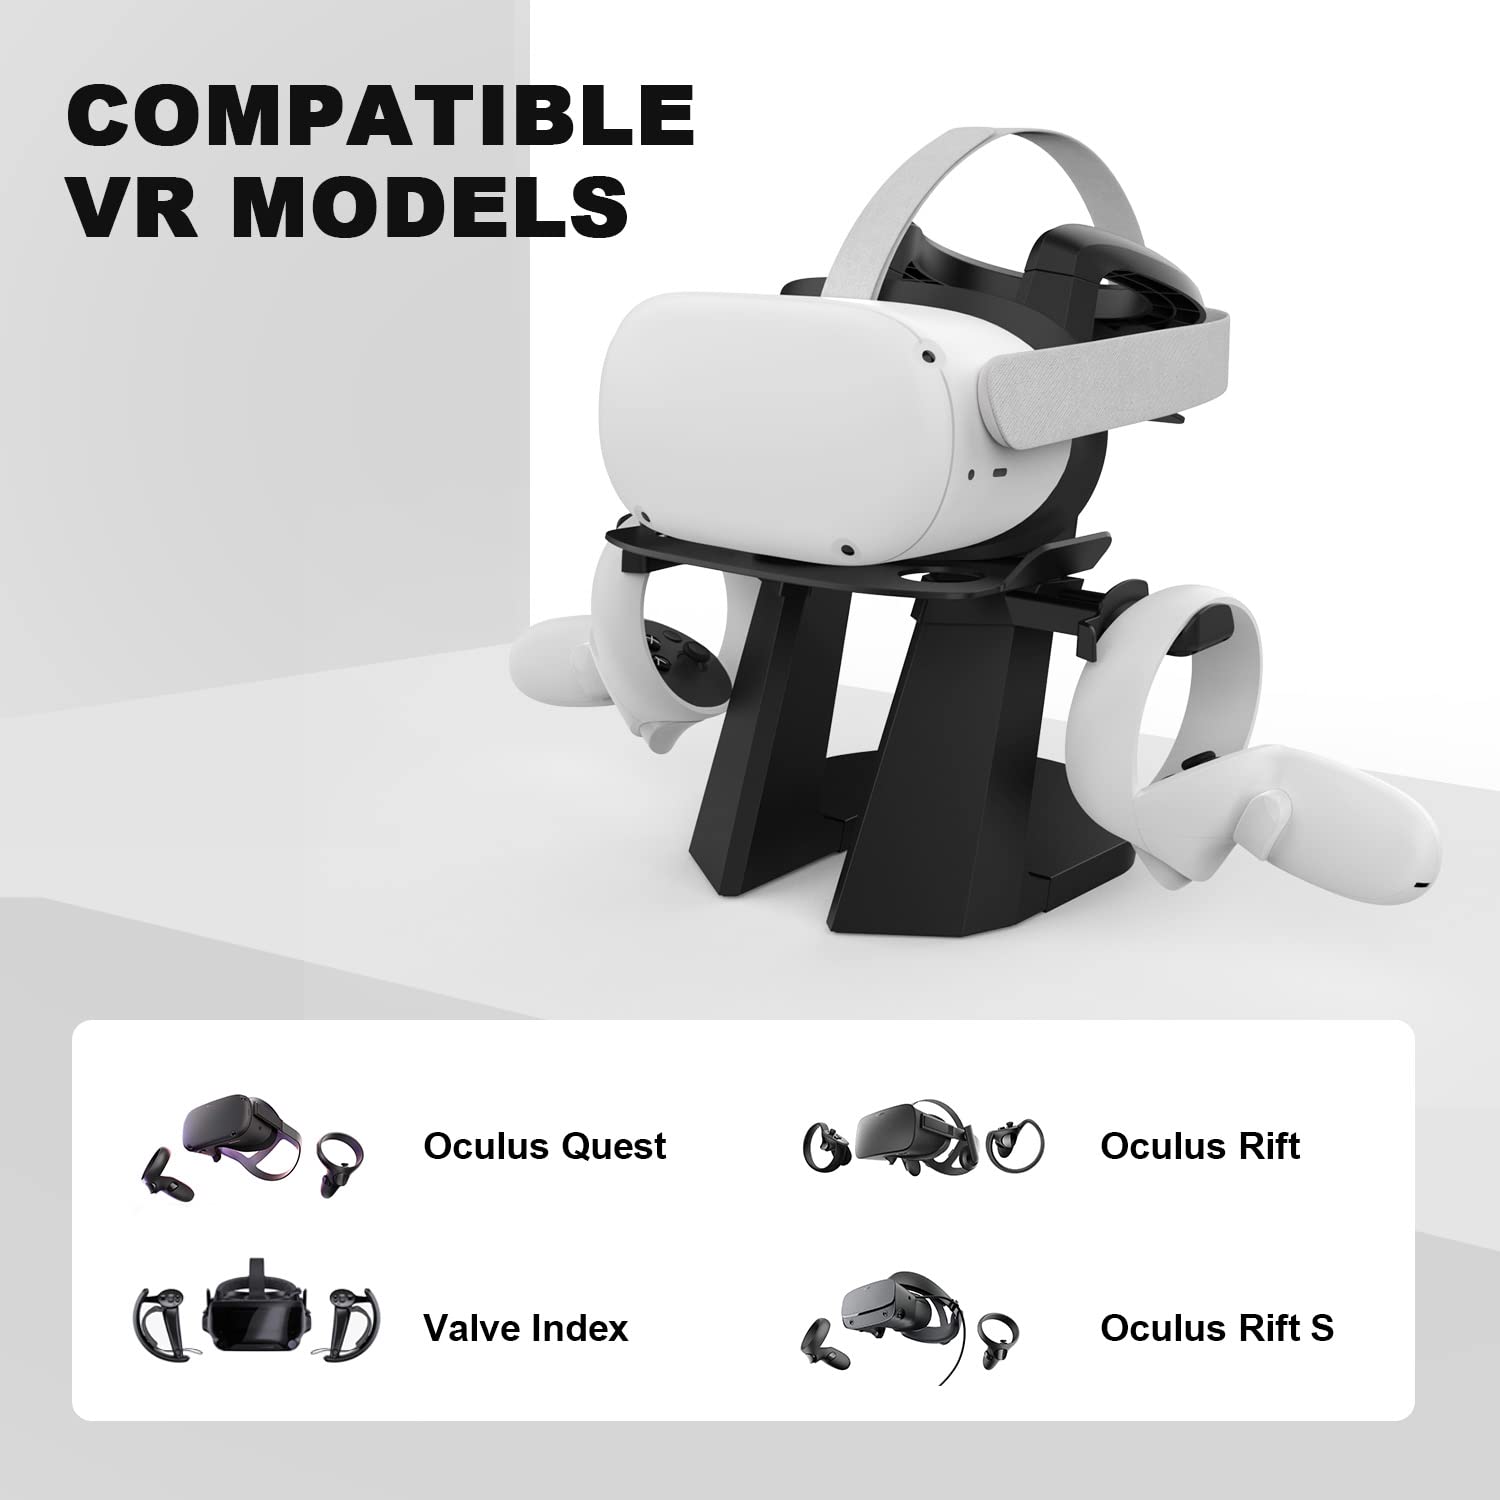 VR Stand Holder Storage Rack Set for Oculus quest, Quest 2, Rift, Rift S, Valve Index Headset and Touch Controllers